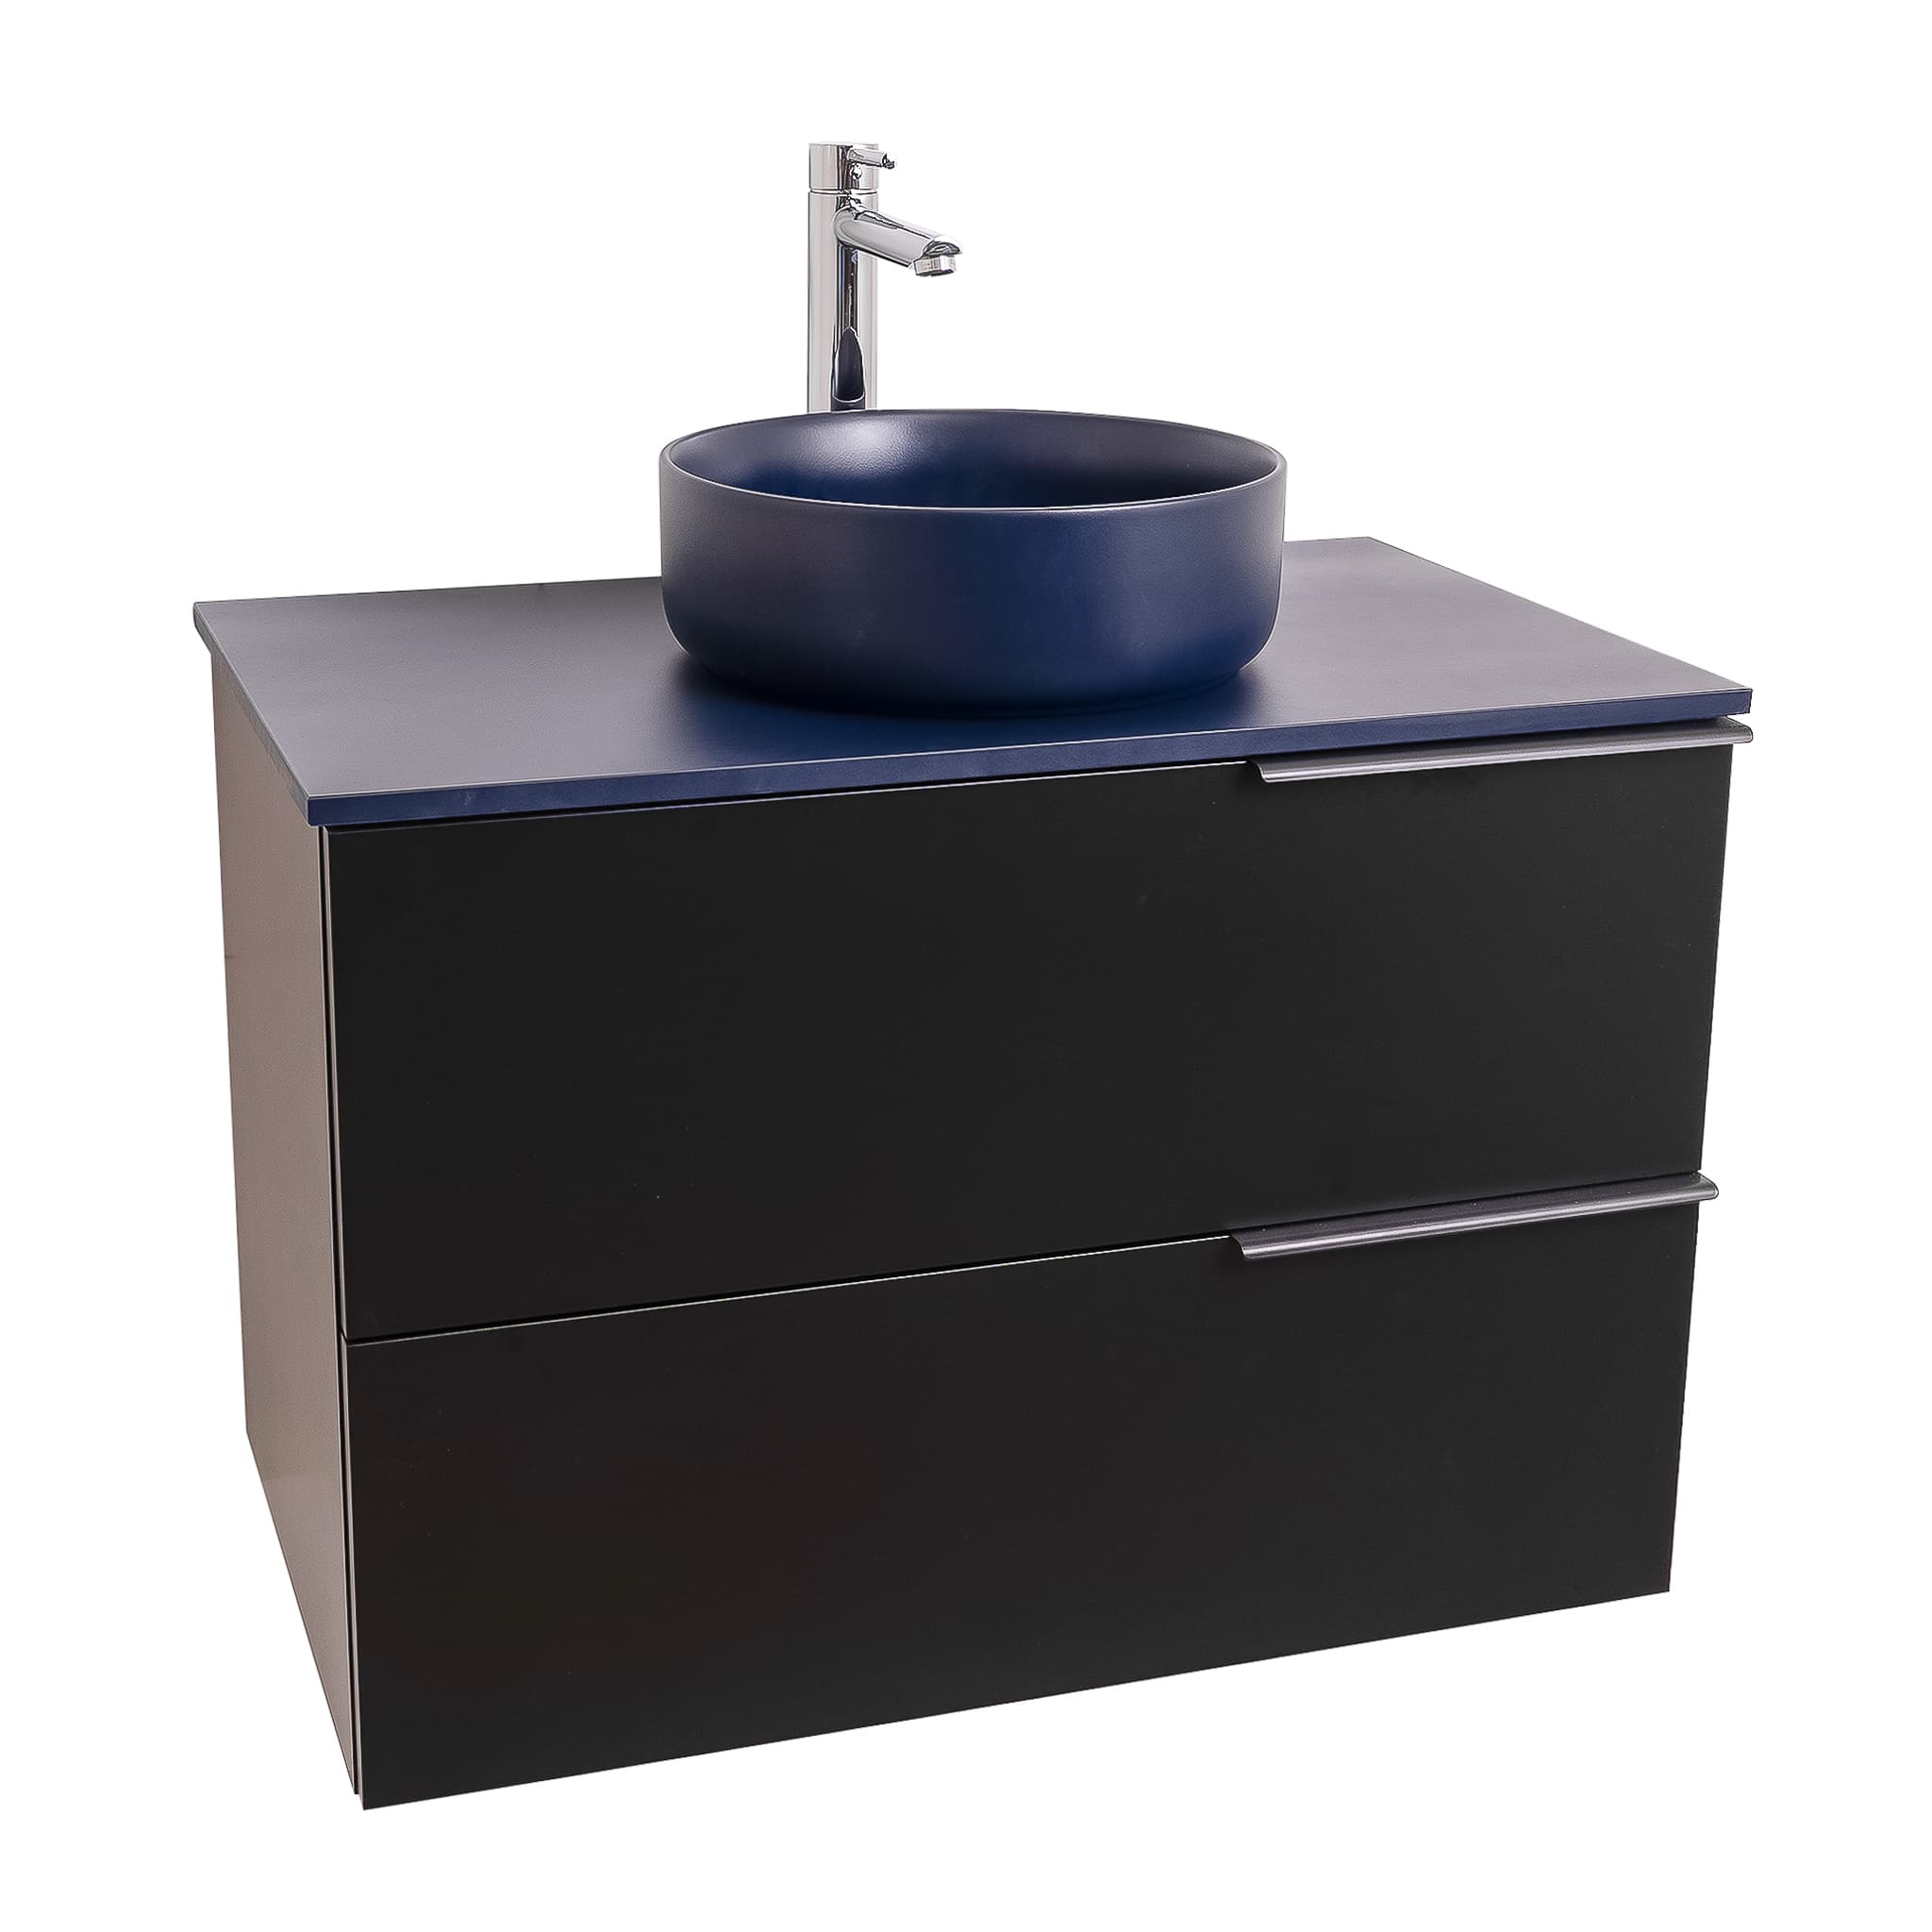 Mallorca 35.5 Matte Black Cabinet, Ares Navy Blue Top And Ares Navy Blue Ceramic Basin, Wall Mounted Modern Vanity Set